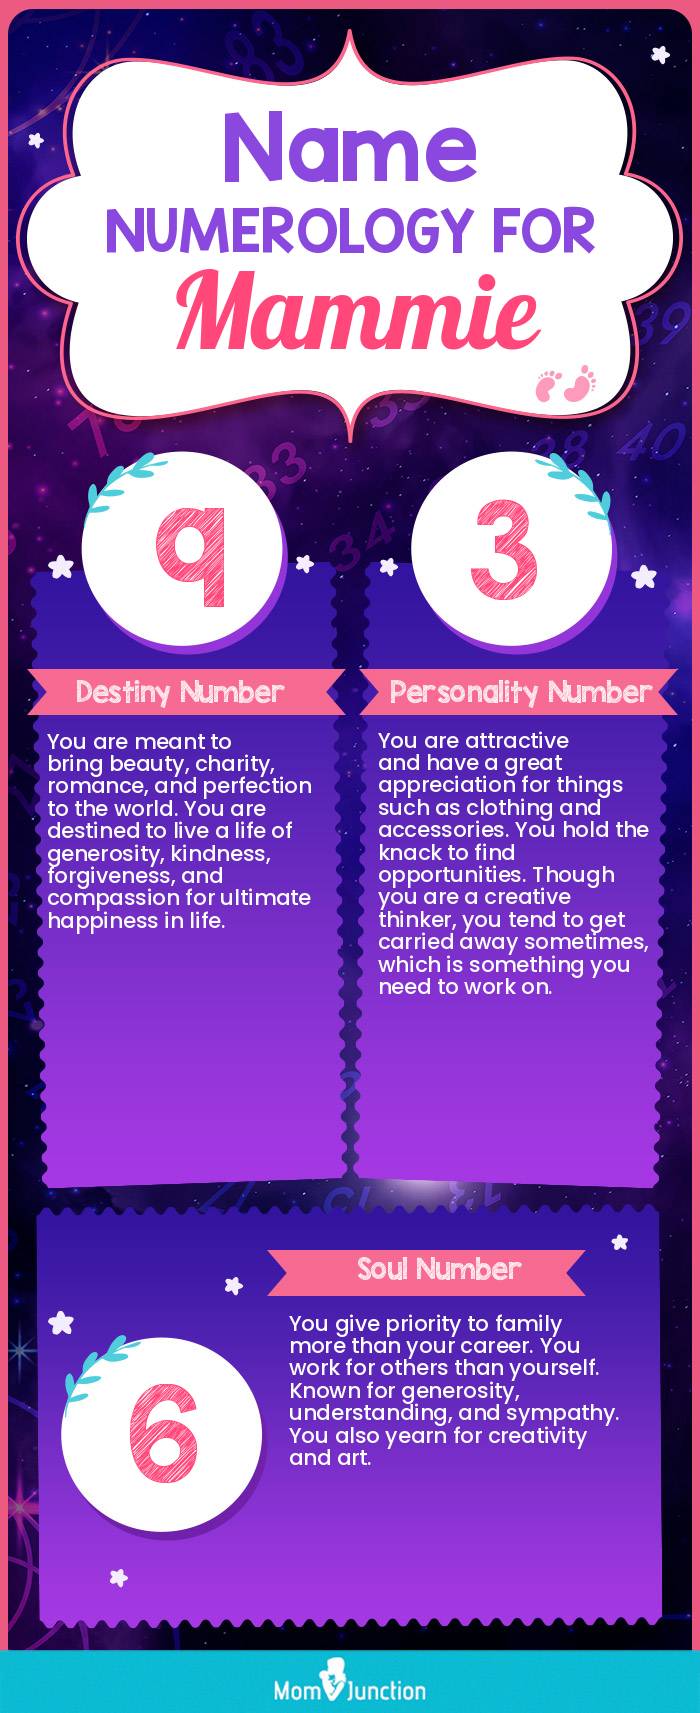 name-numerology-for-mammie-girl